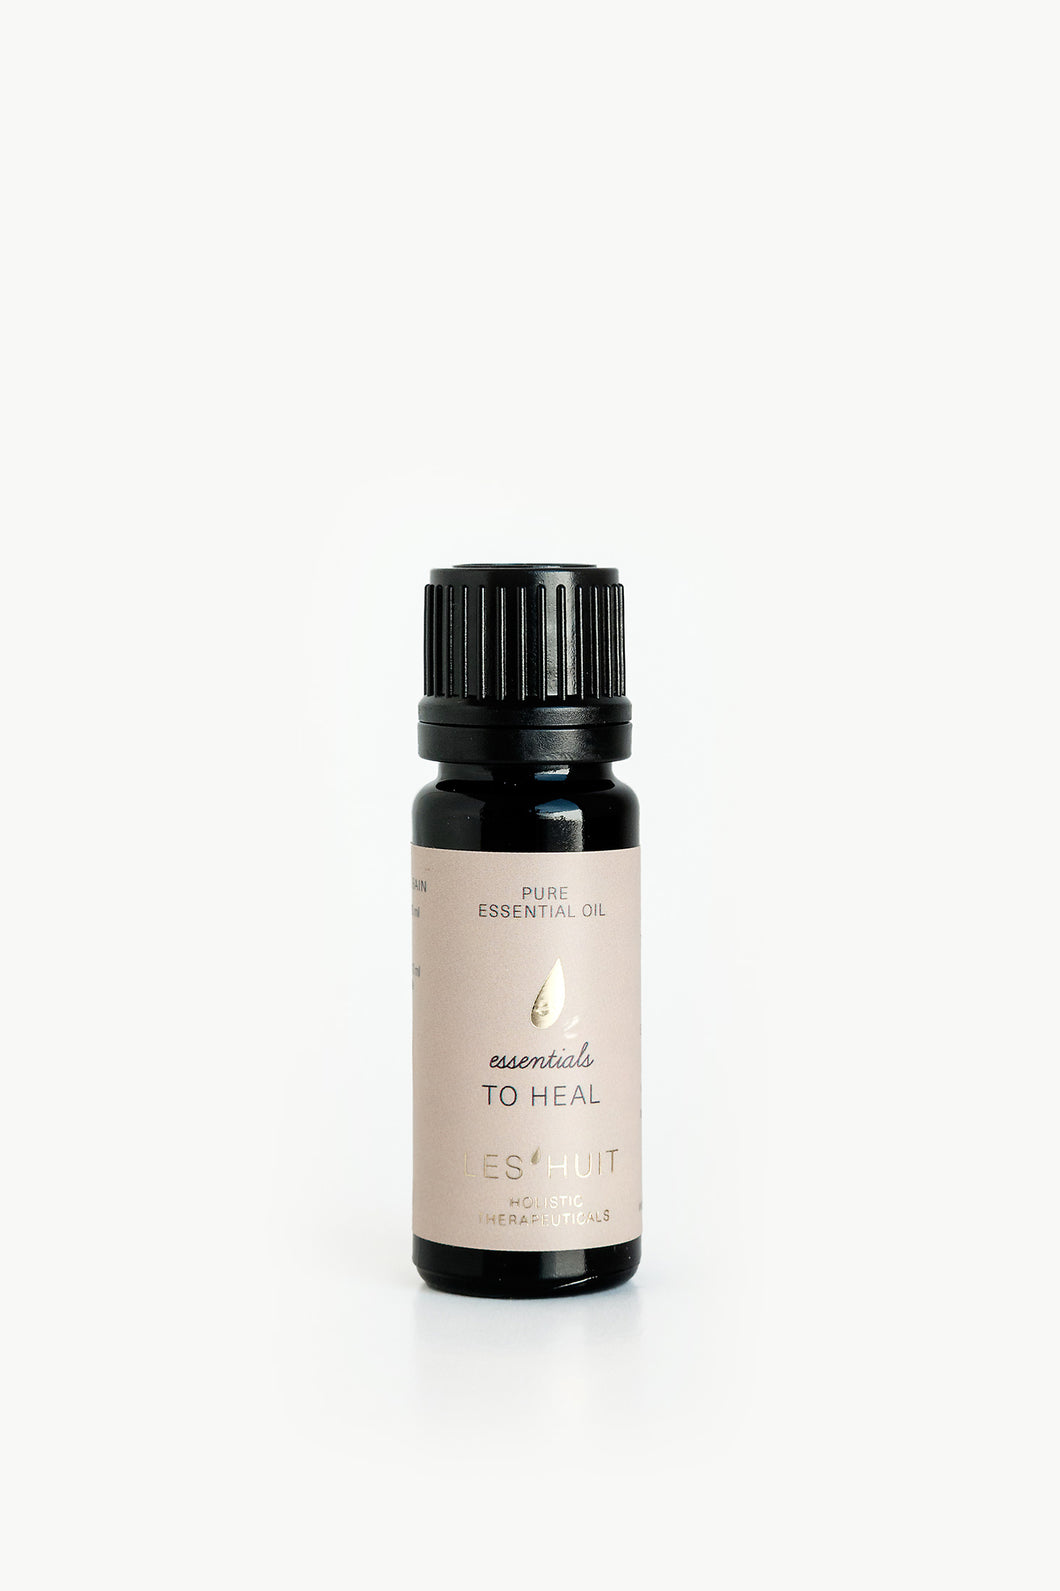 Les Huit  Pure essential oil N°7 – To Connect